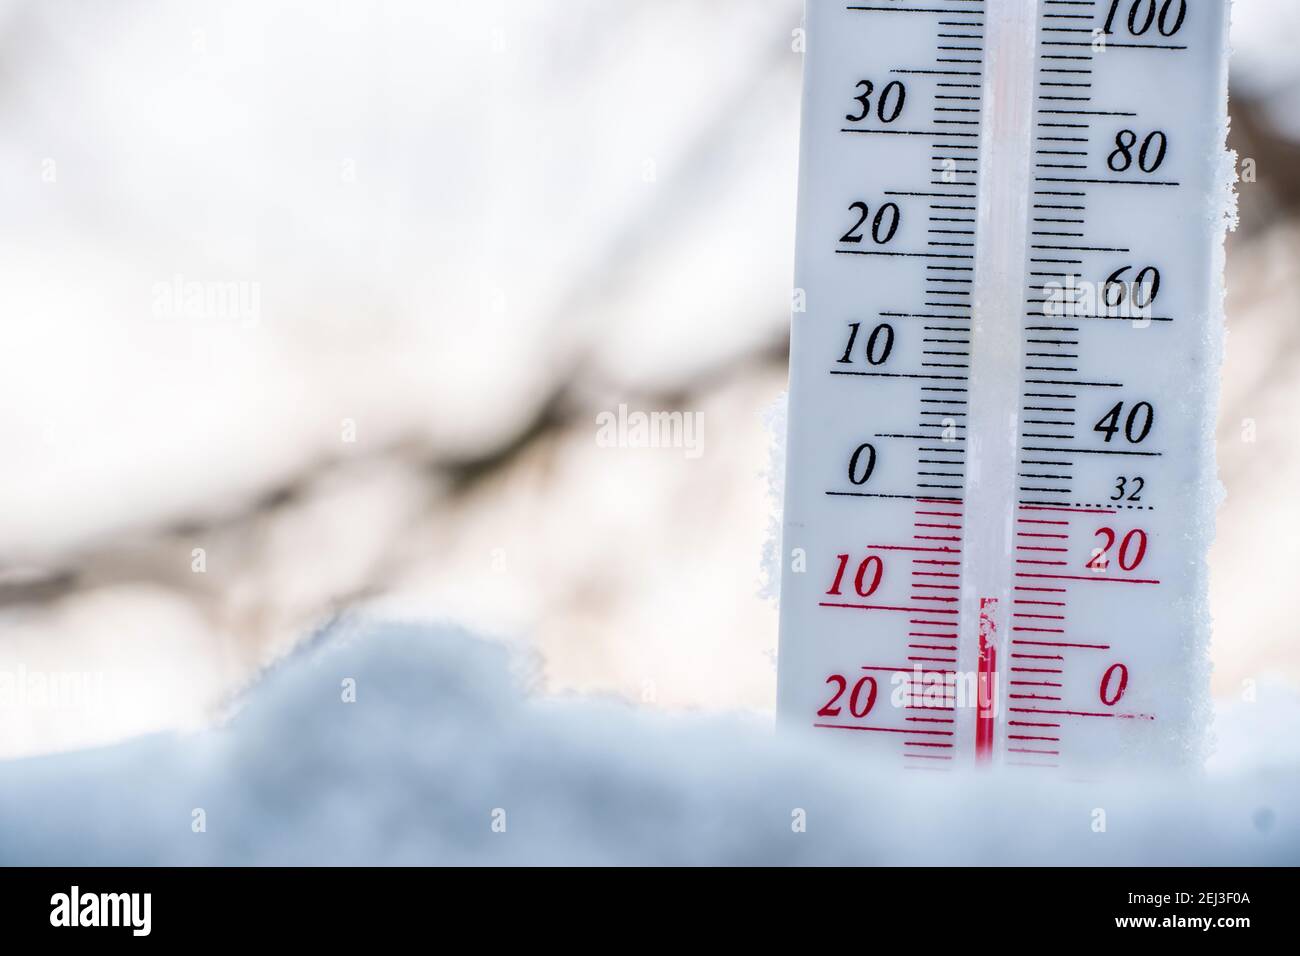 https://c8.alamy.com/comp/2EJ3F0A/the-thermometer-lies-on-the-snow-in-winter-showing-a-negative-temperature-meteorological-conditions-in-a-harsh-climate-in-winter-with-low-air-and-amb-2EJ3F0A.jpg